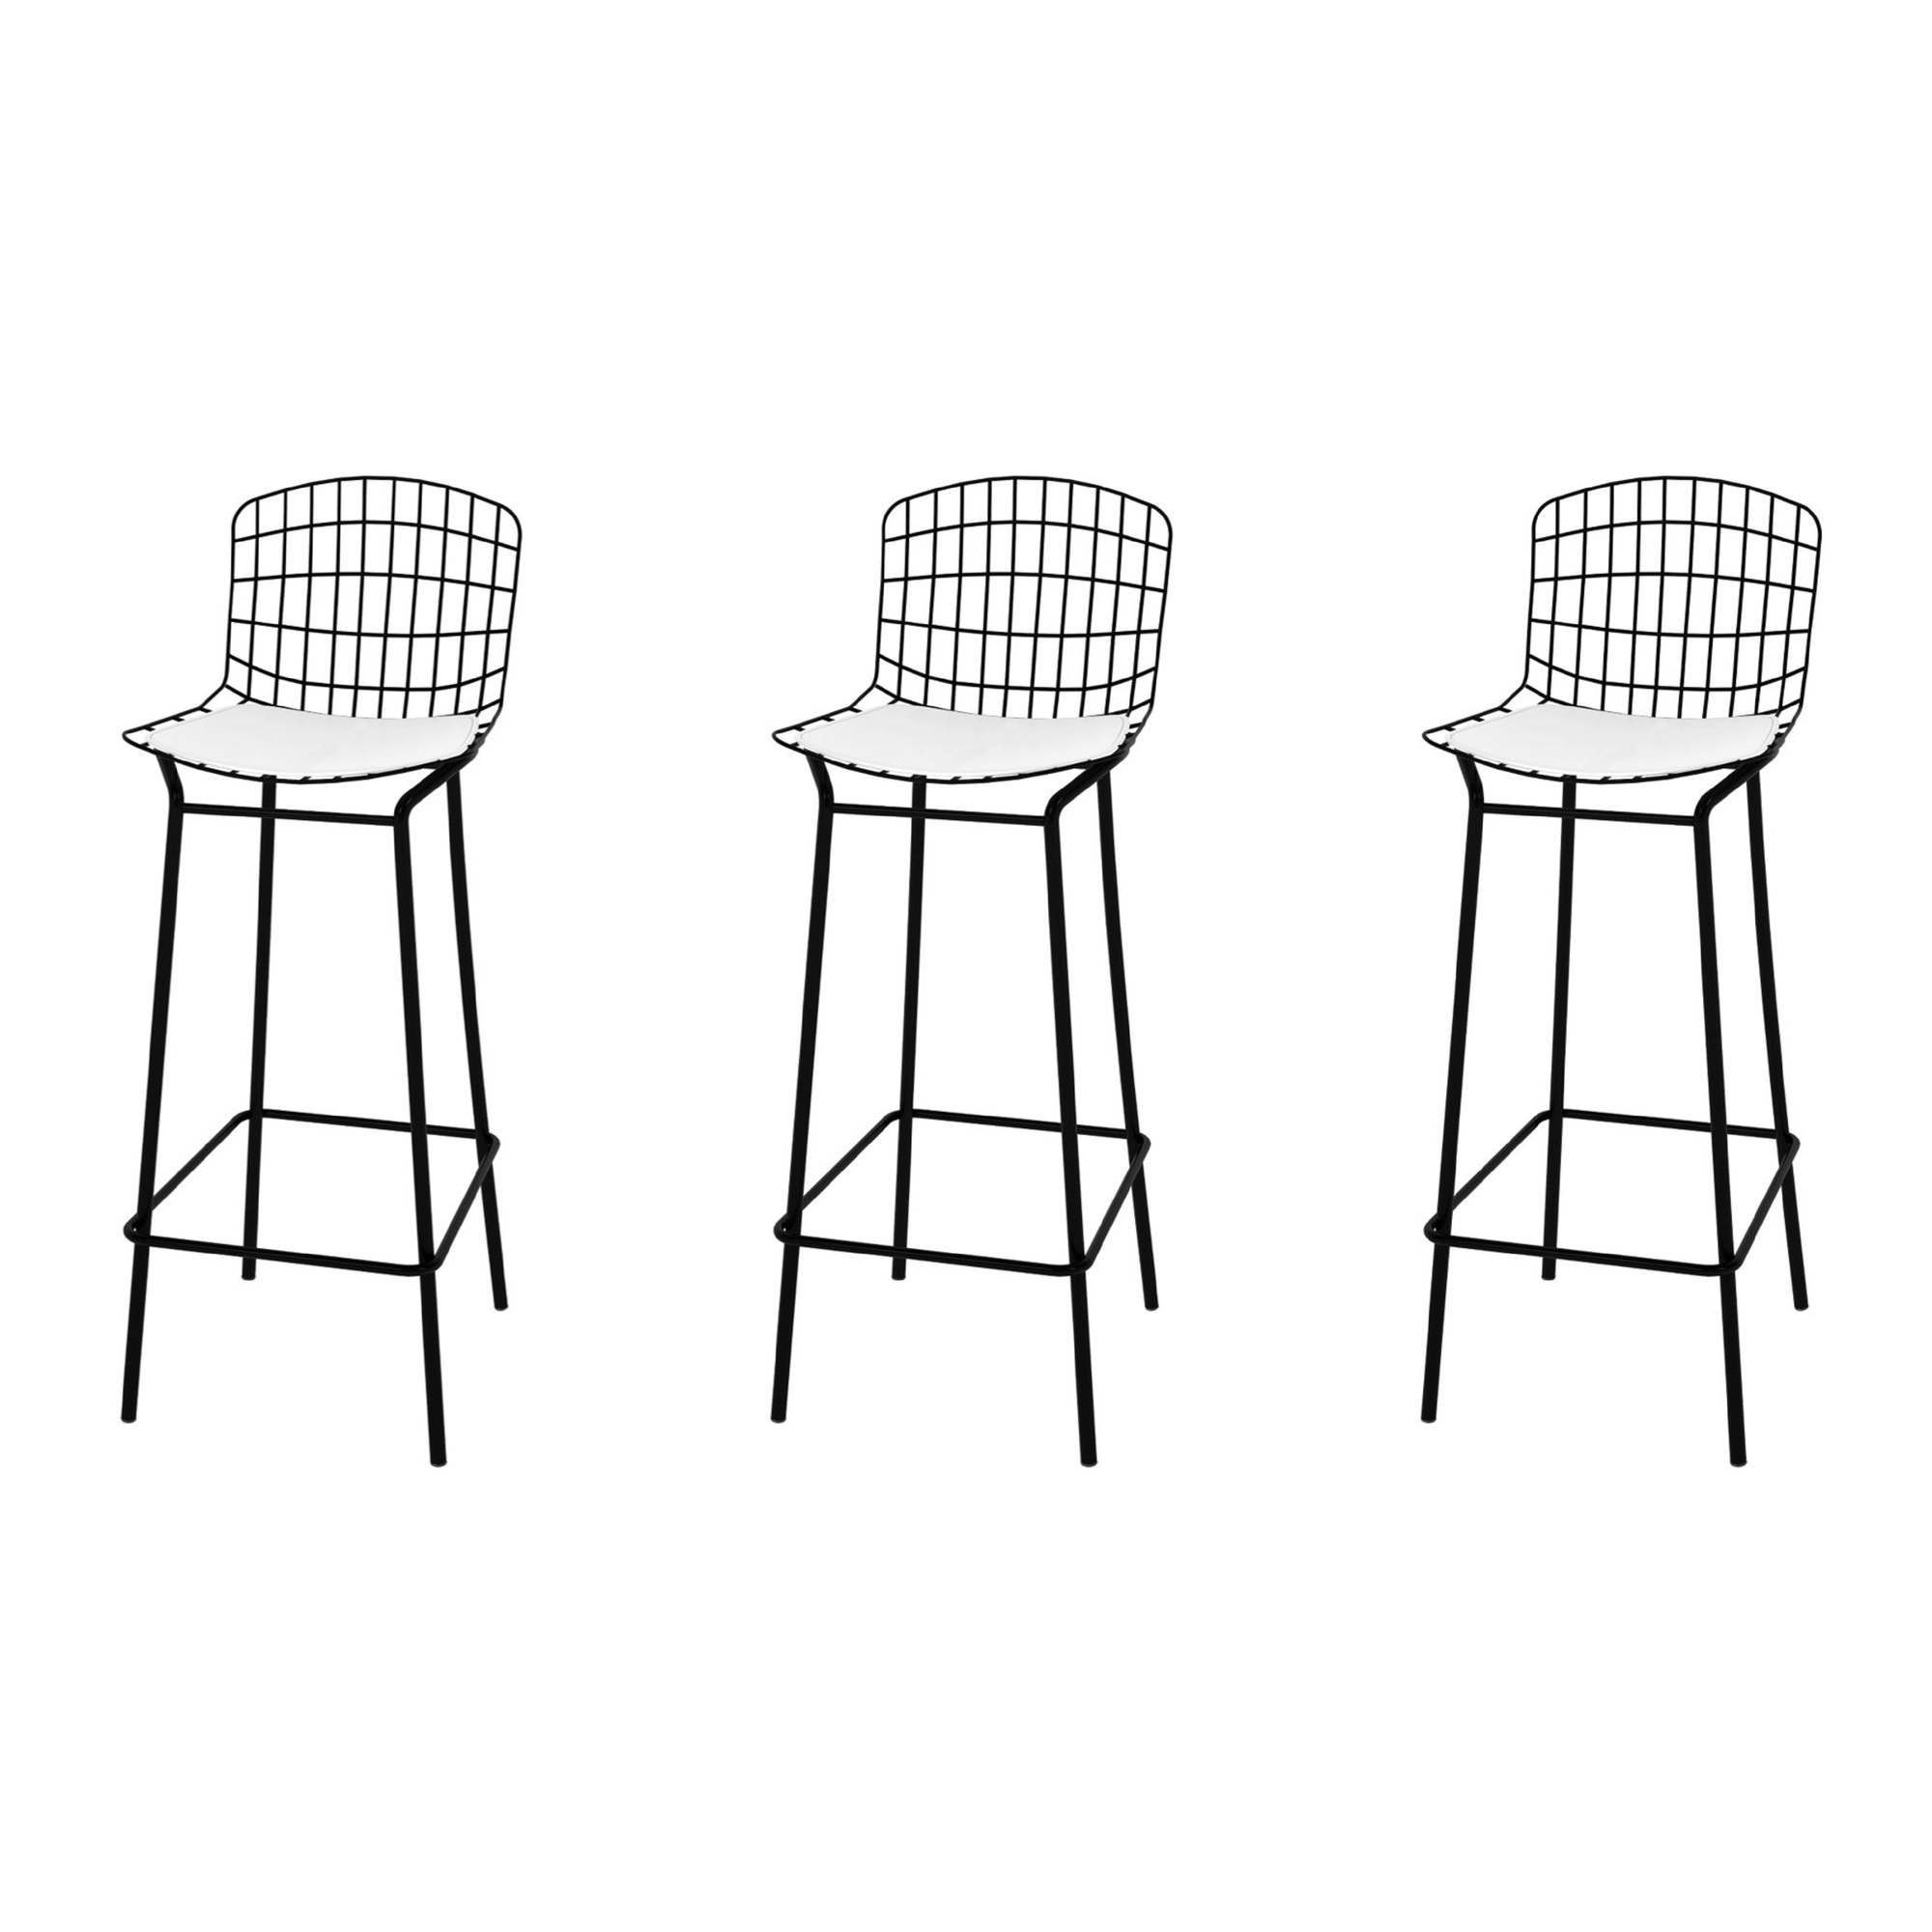 Manhattan Comfort, Madeline 41.73Inch Stool Set of 3 Cushion Black White, Primary Color Black, Included (qty.) 3 Model 3-198AMC